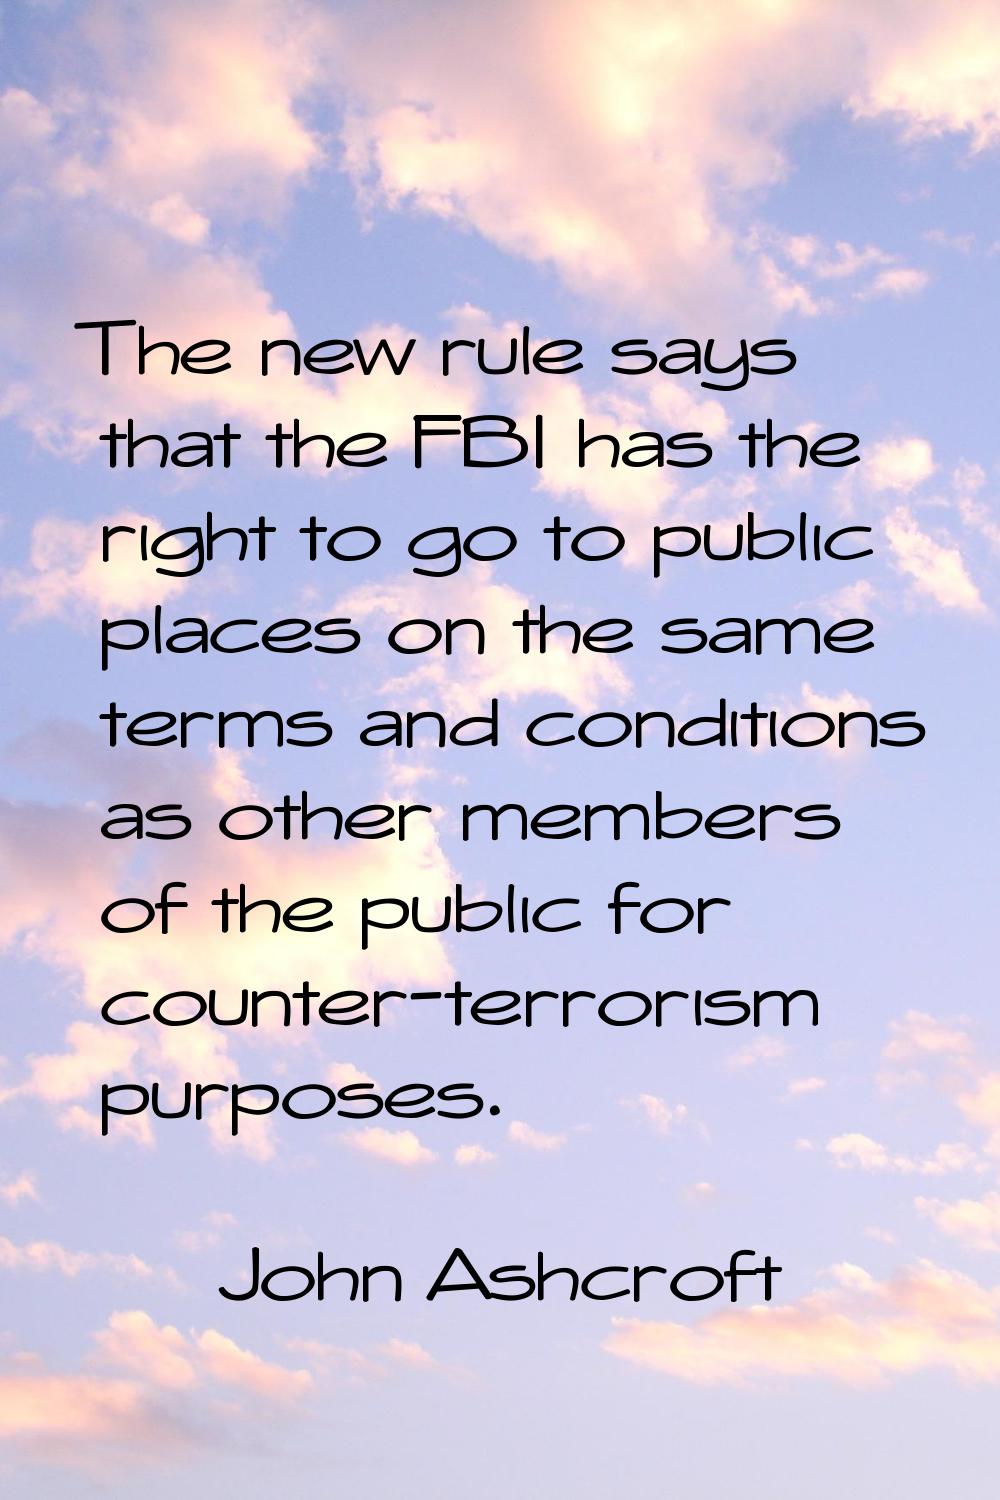 The new rule says that the FBI has the right to go to public places on the same terms and condition